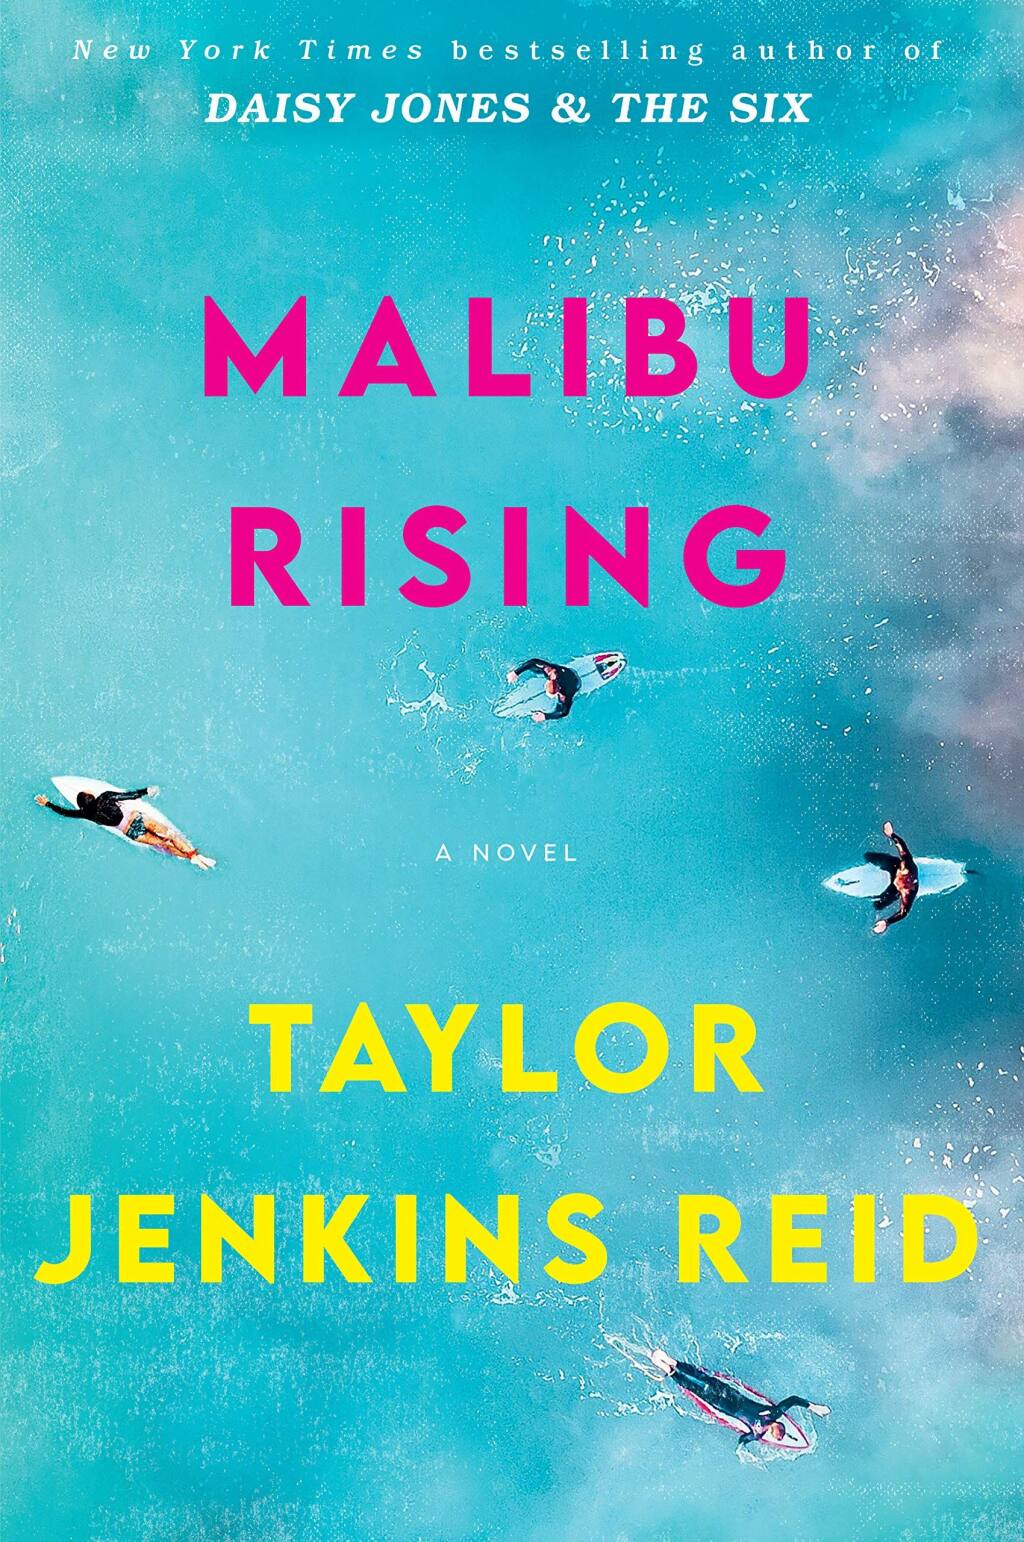 Taylor Jenkins Reid’s “Survive the Night” is coming in June to out local bookstores (BALLANTINE)